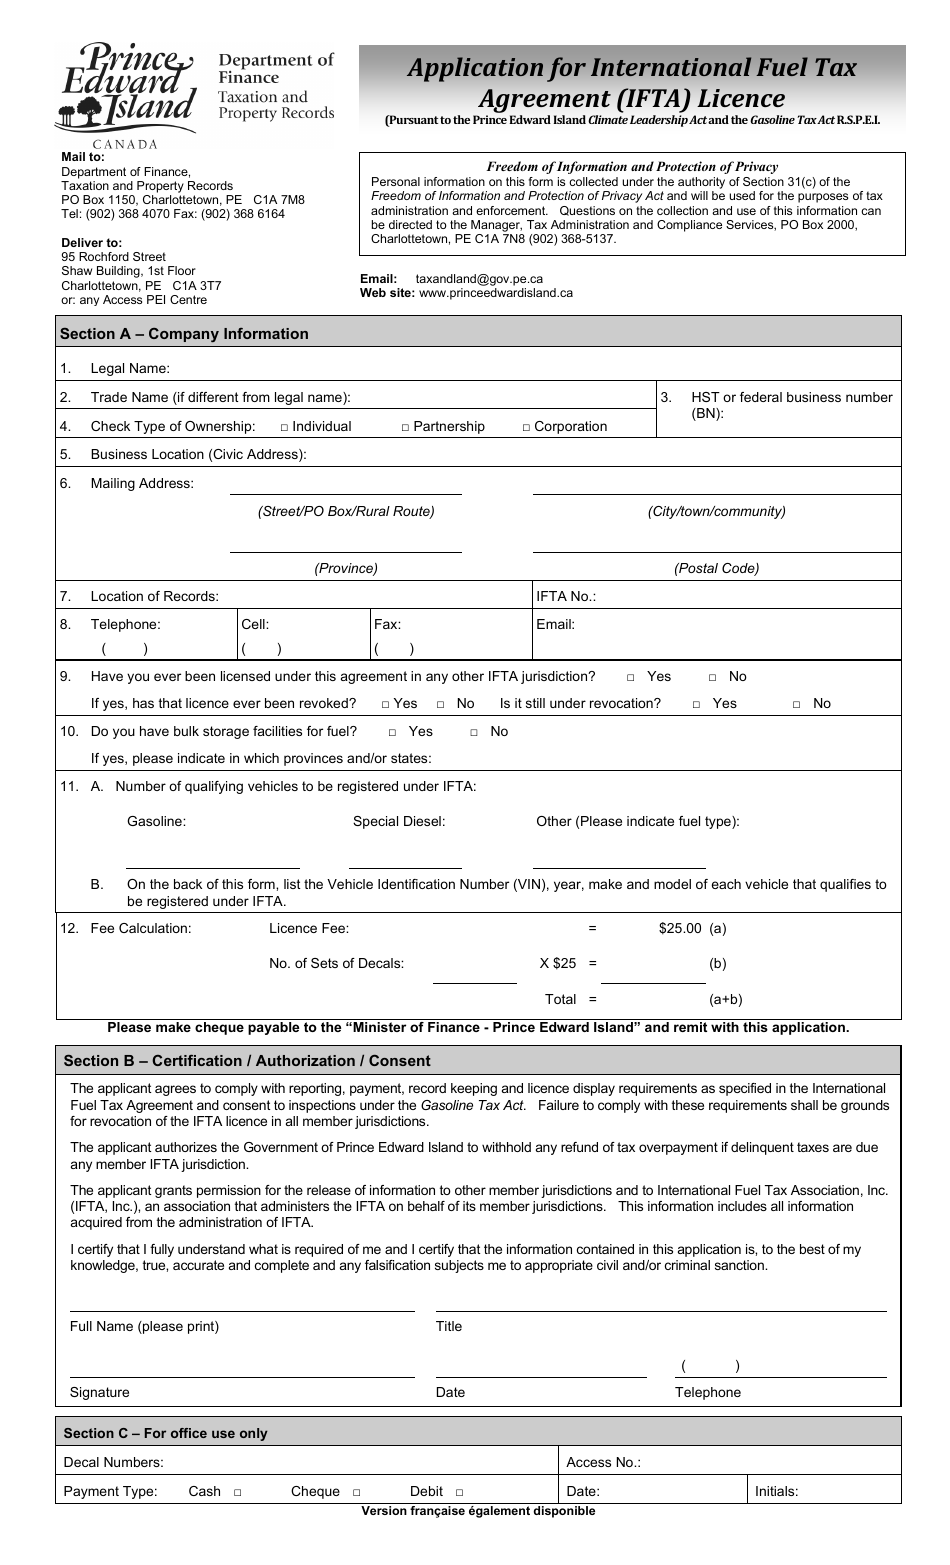 Application for International Fuel Tax Agreement (Ifta) Licence - Prince Edward Island, Canada, Page 1